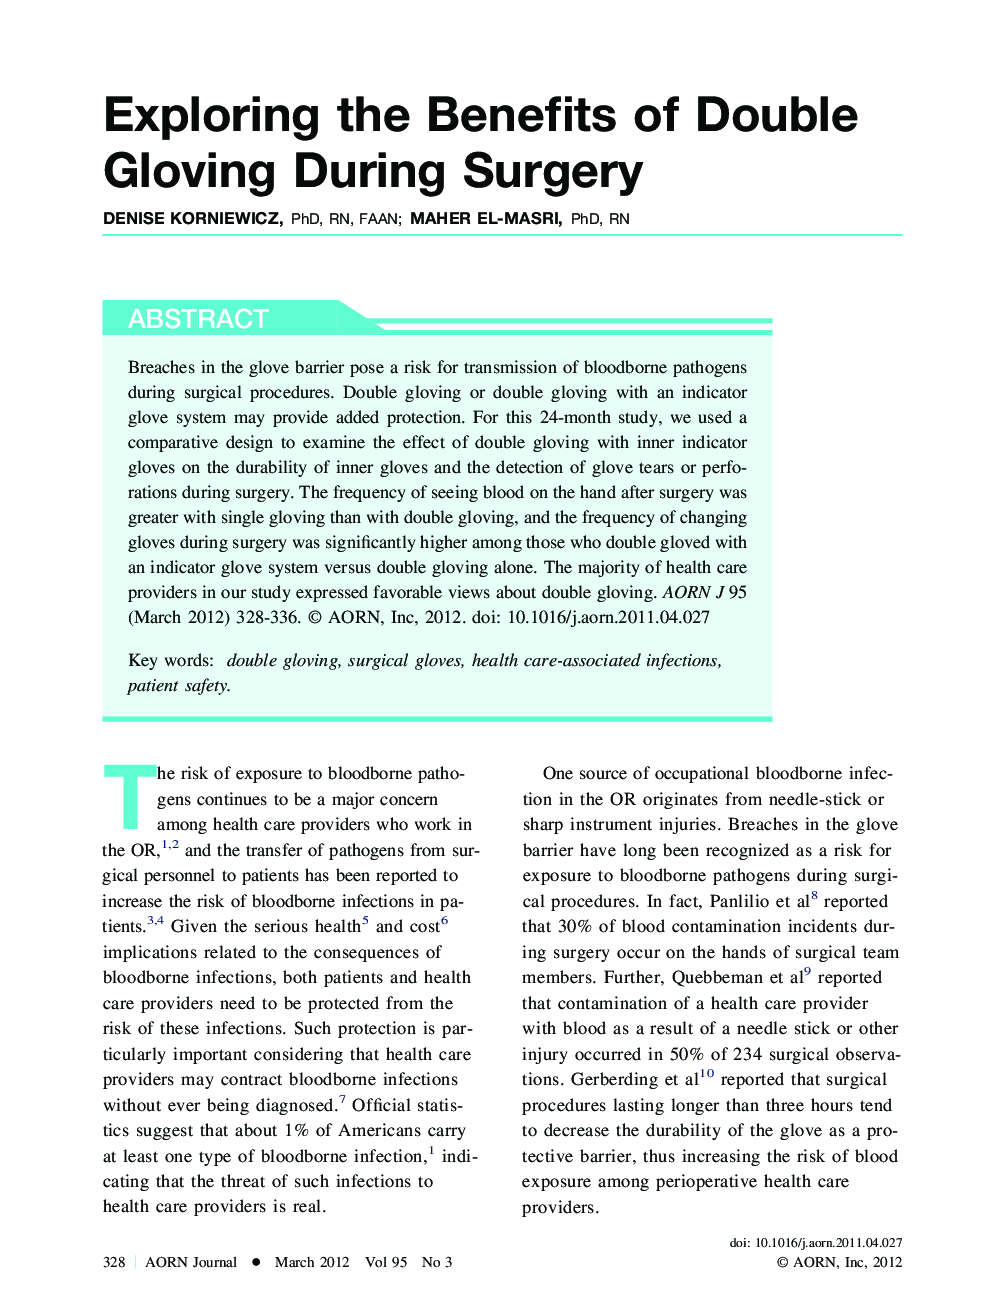 Exploring the Benefits of Double Gloving During Surgery